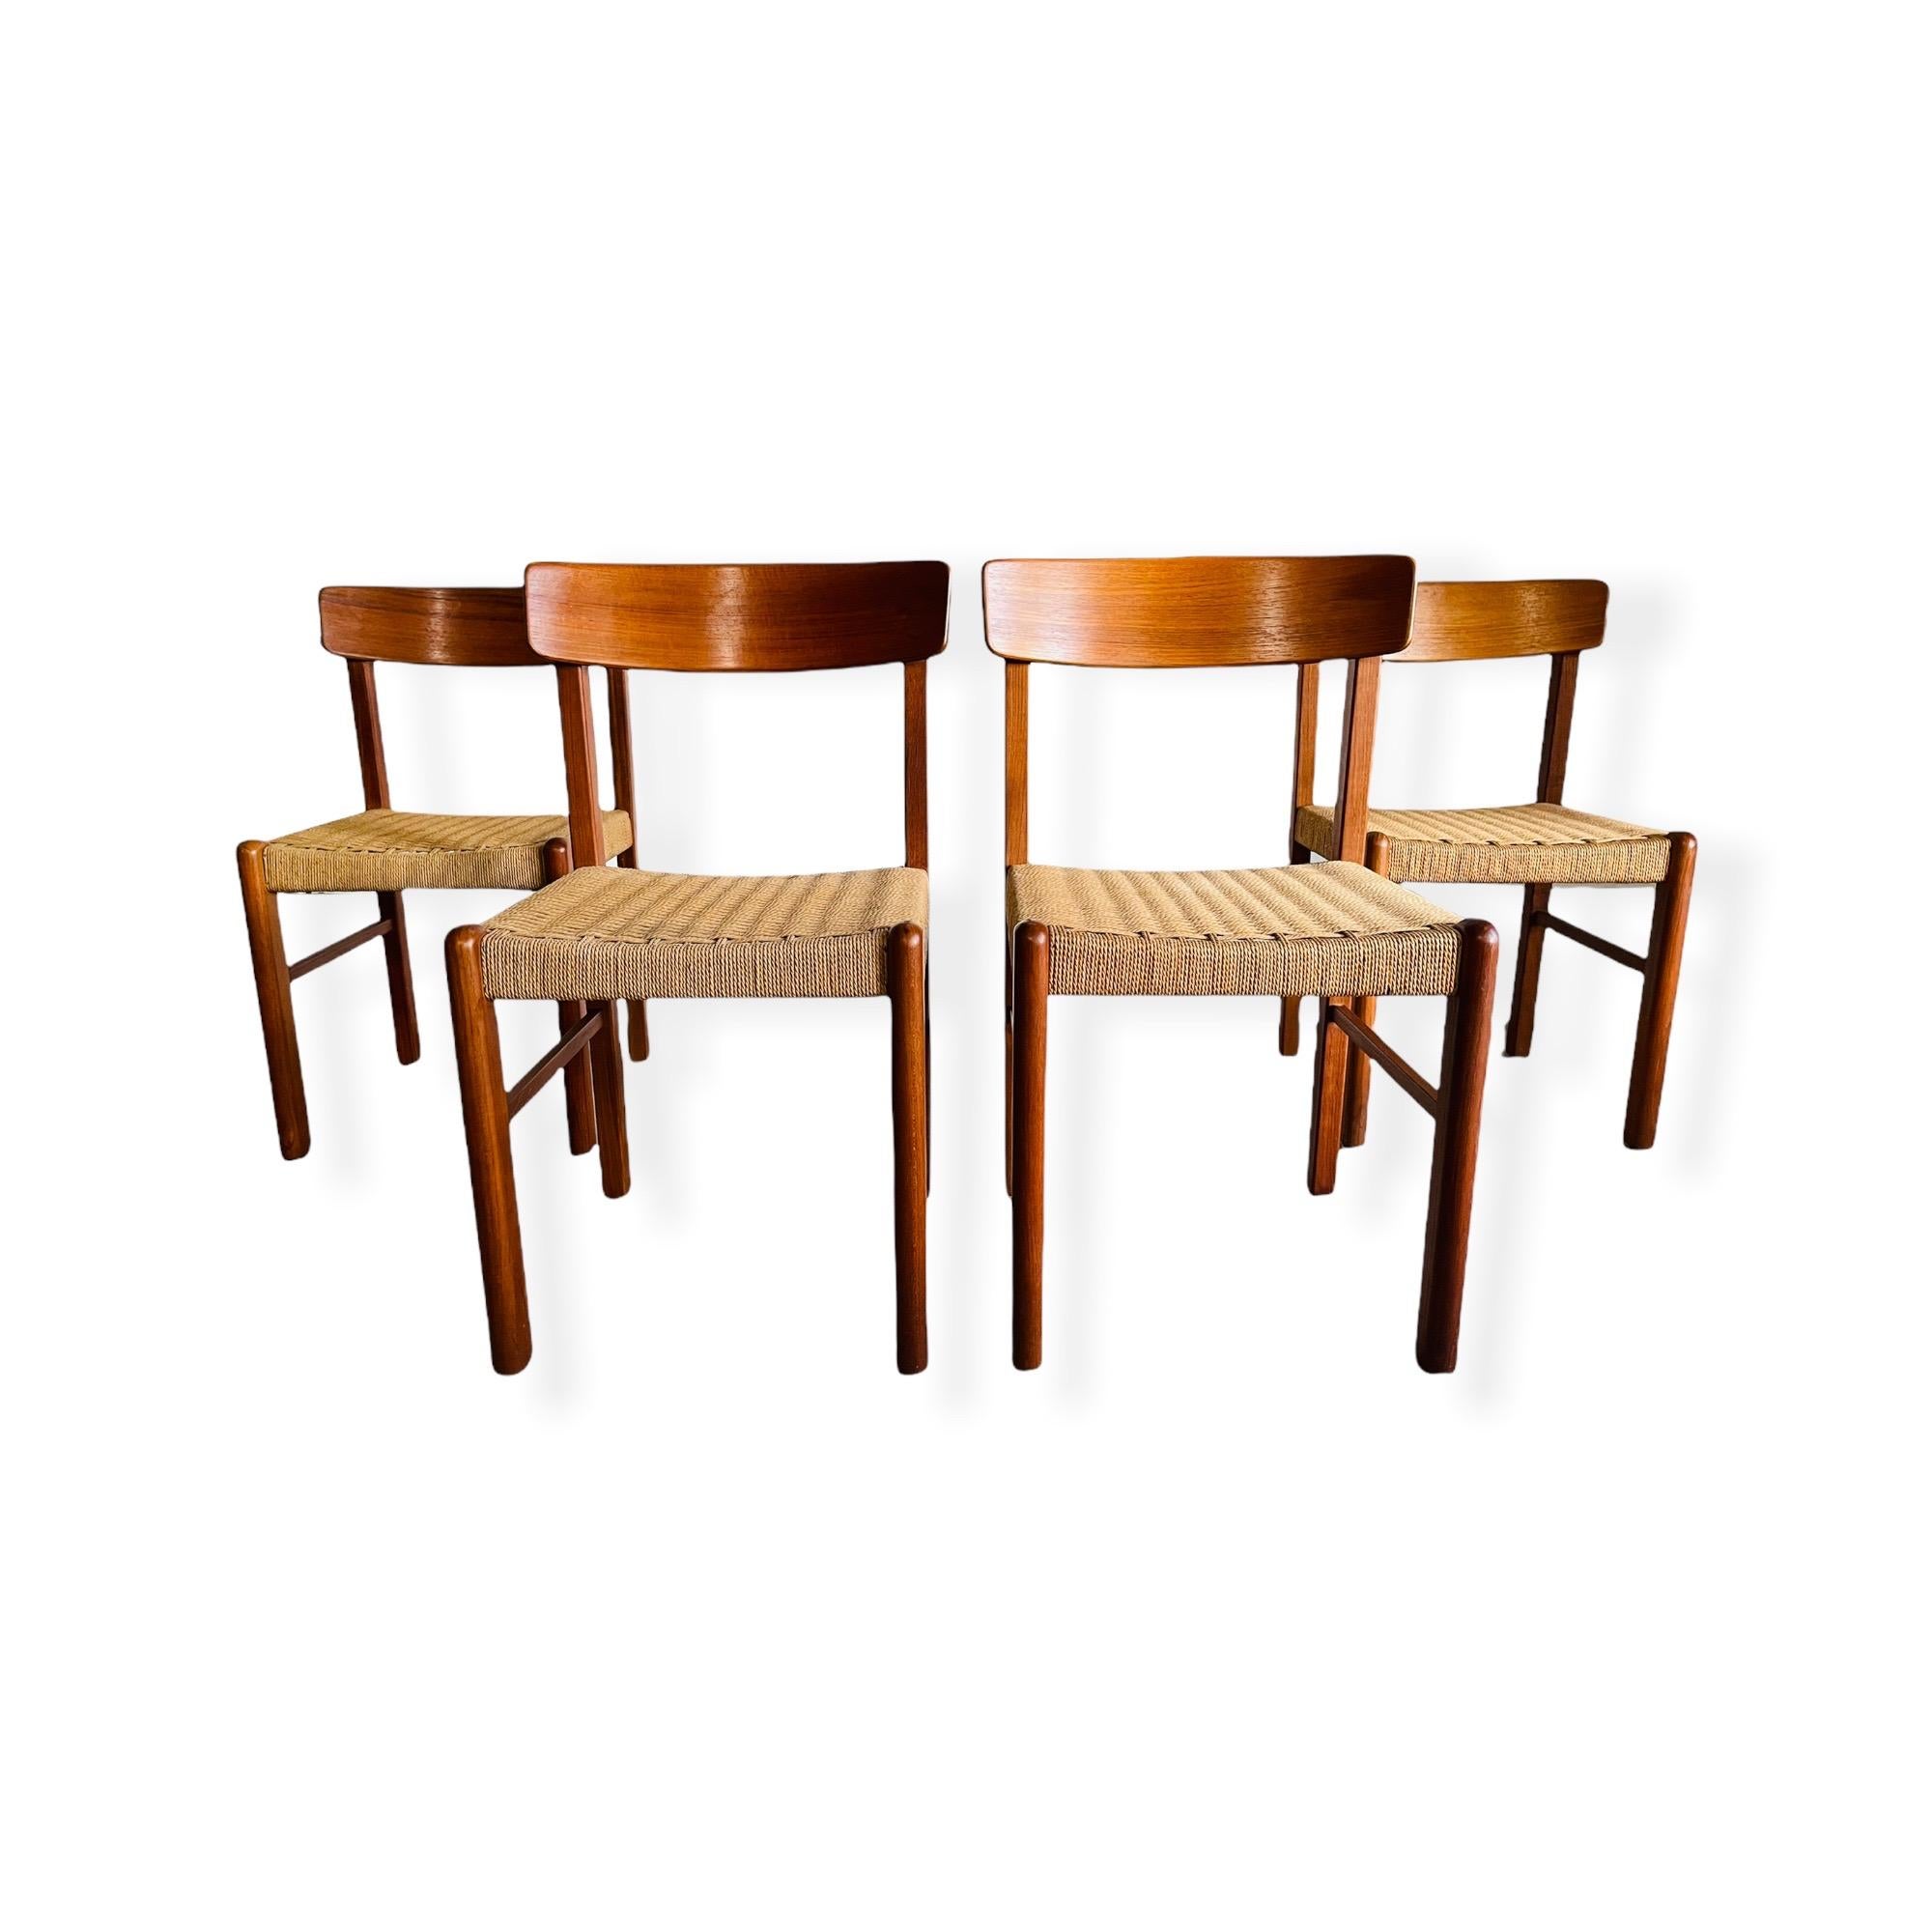 Here is a beautiful set 4 mid-century modern teak chairs. The chairs have the Danish cord seats. All chairs are in good vintage condition with normal wear consistent with age and use. 

Measures: W 17.5” x D 18” x H 32” x SH 18”.